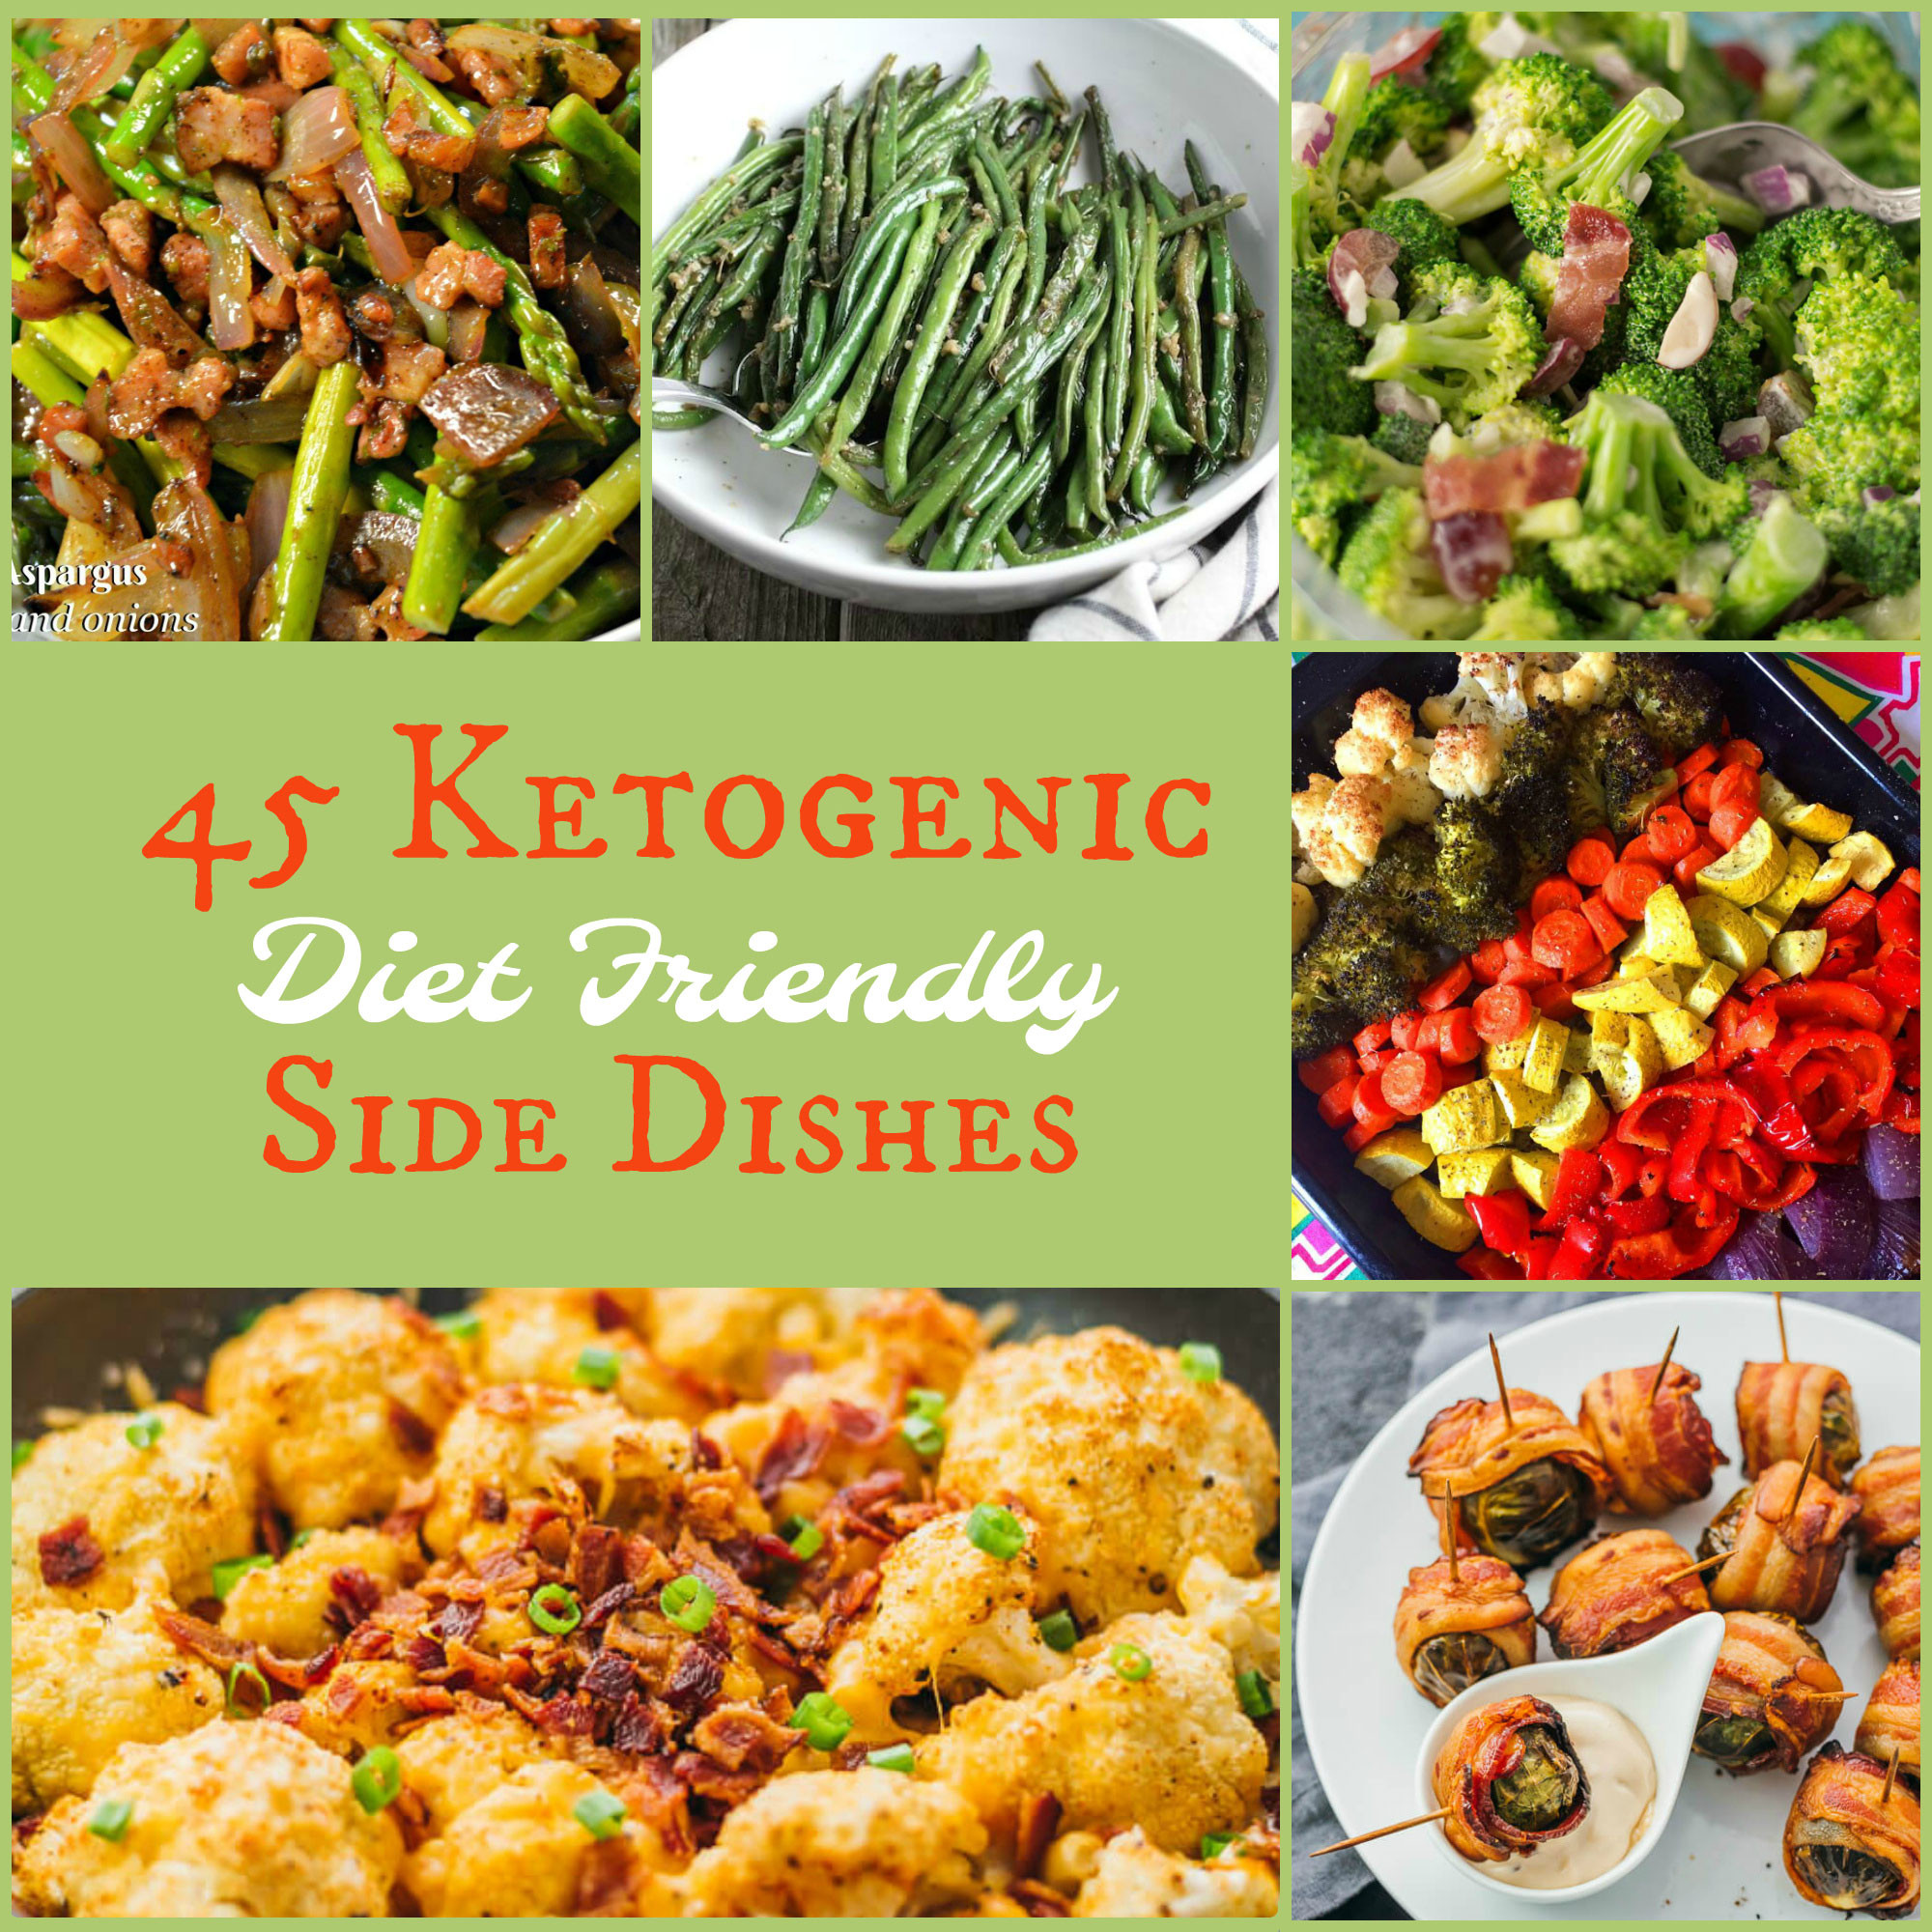 Easy Keto Side Dishes
 Keto Diet Side Dishes for the Holidays Ketogenic recipe